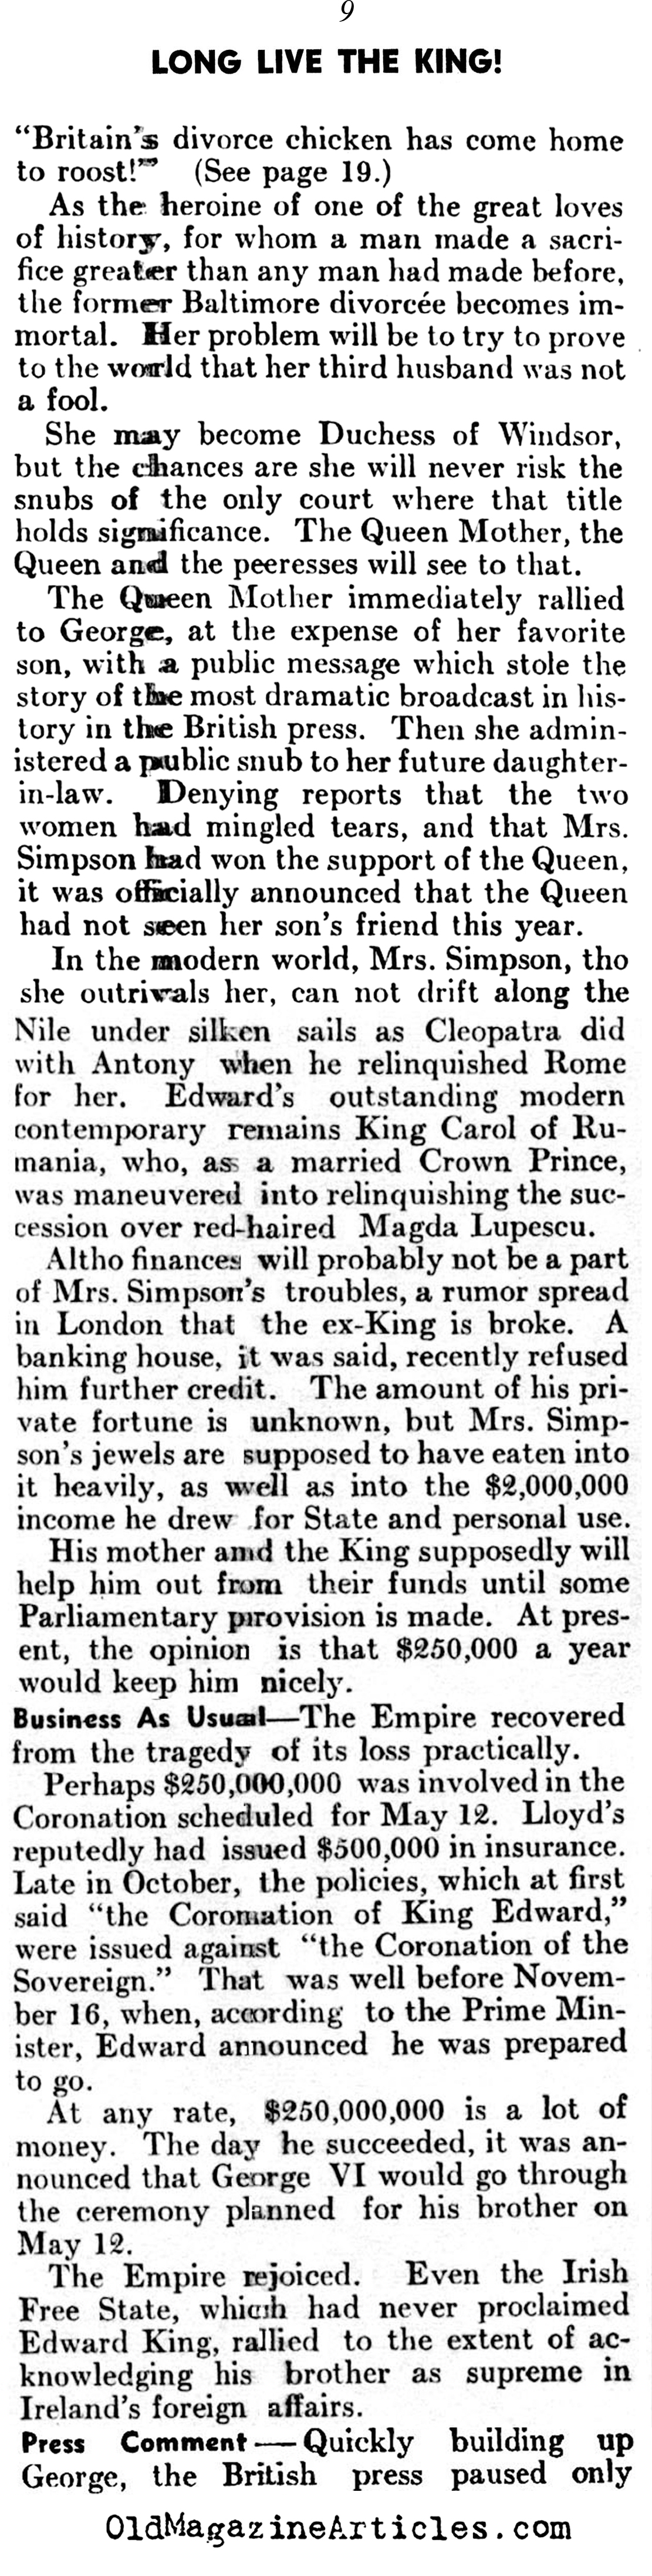 The Abdication (Literary Digest, 1936)